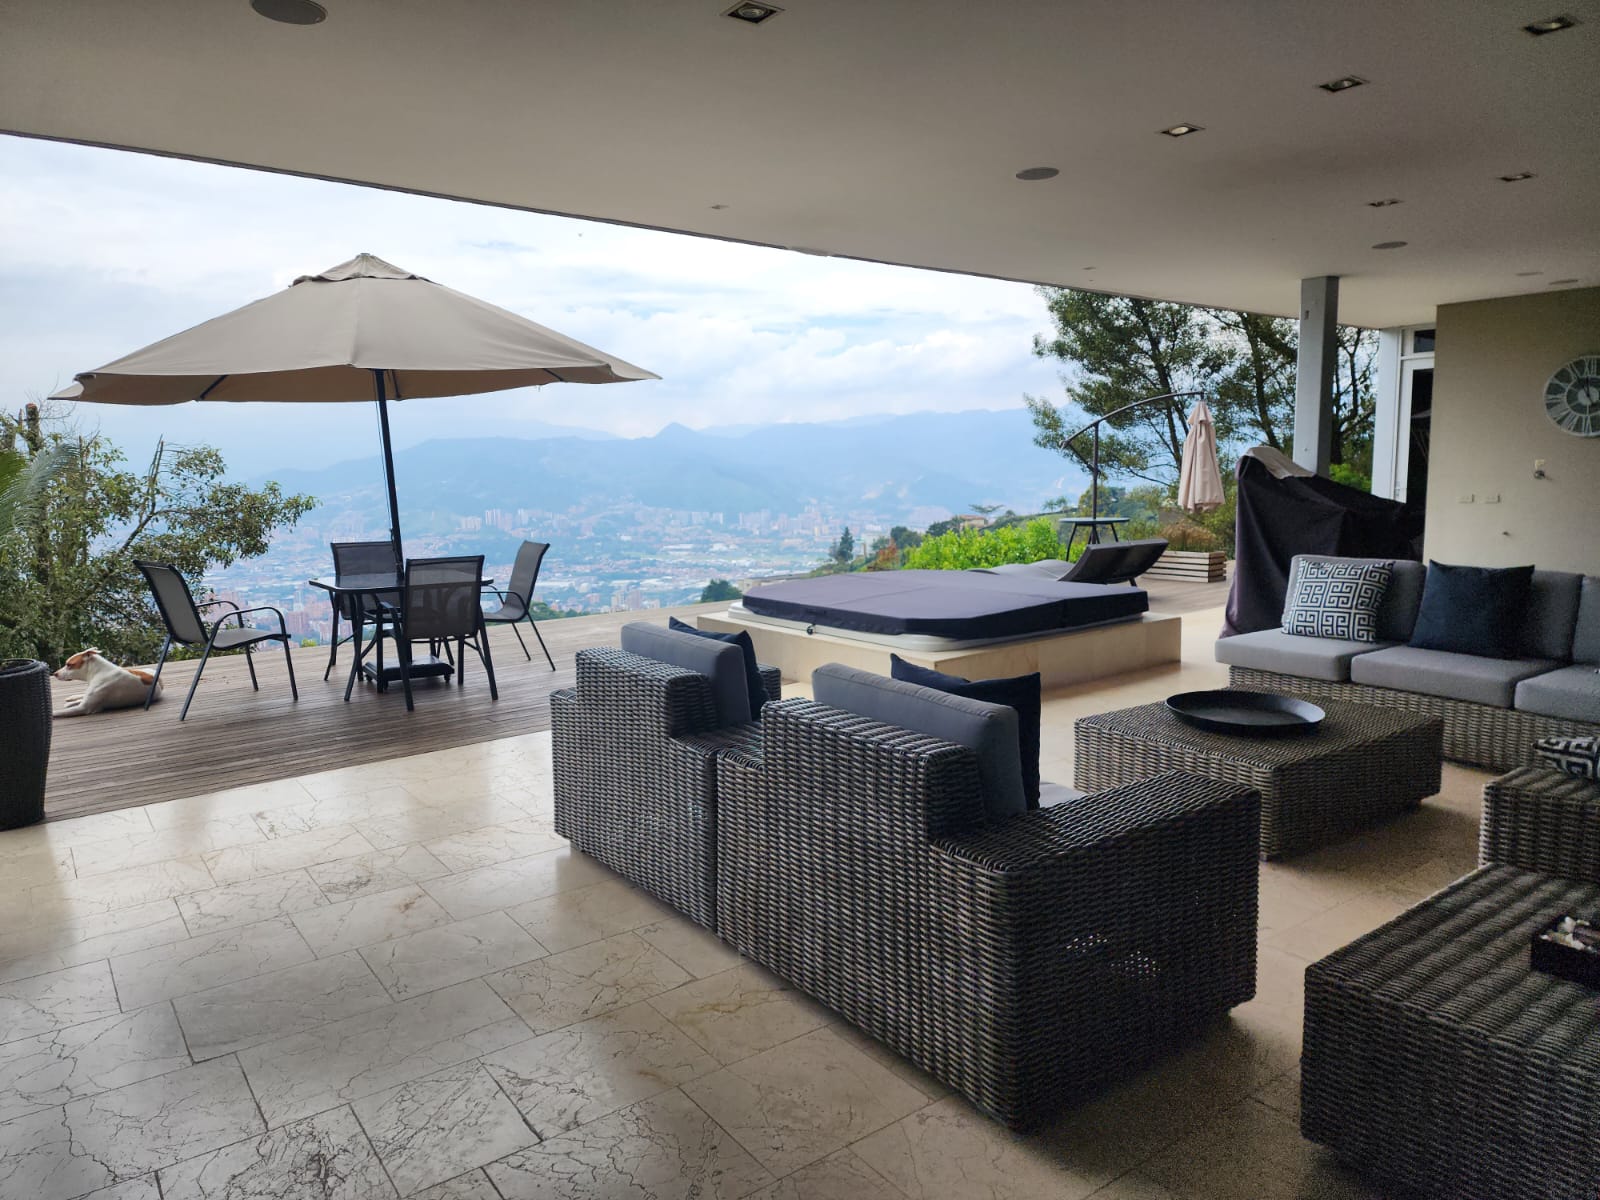 Incredible 5 BR El Poblado 2 Level Luxury Home – Spectacular Mountainside Deck, Jacuzzi, A/C, & Worldly Views From Every Room